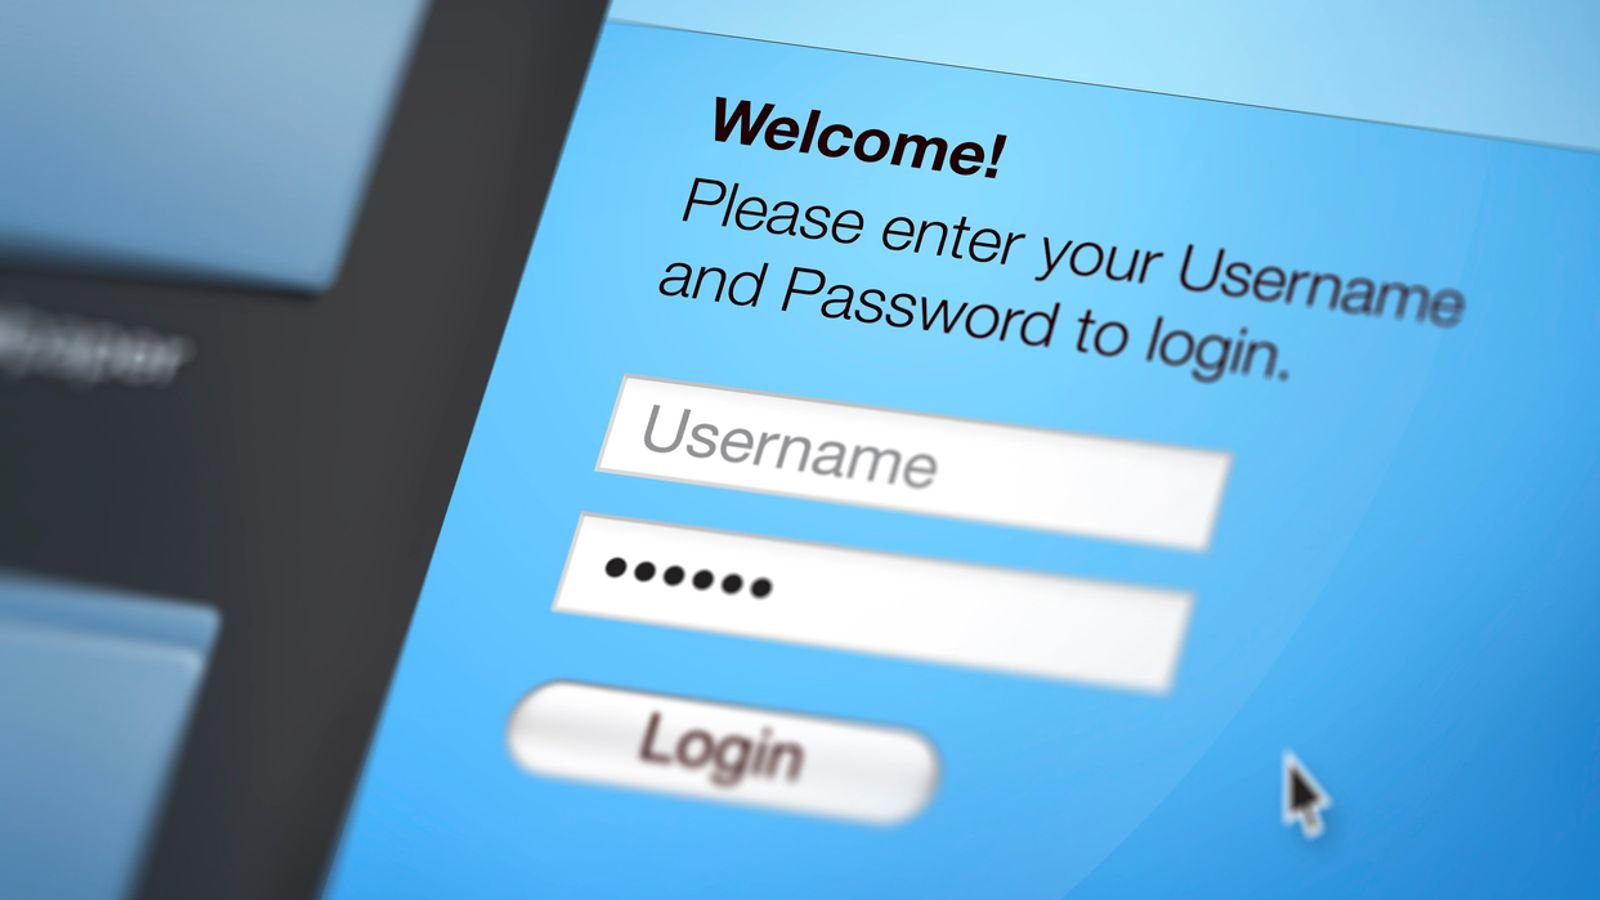 UK Bans Common Passwords like 'Admin' and '12345' to Boost Cybersecurity